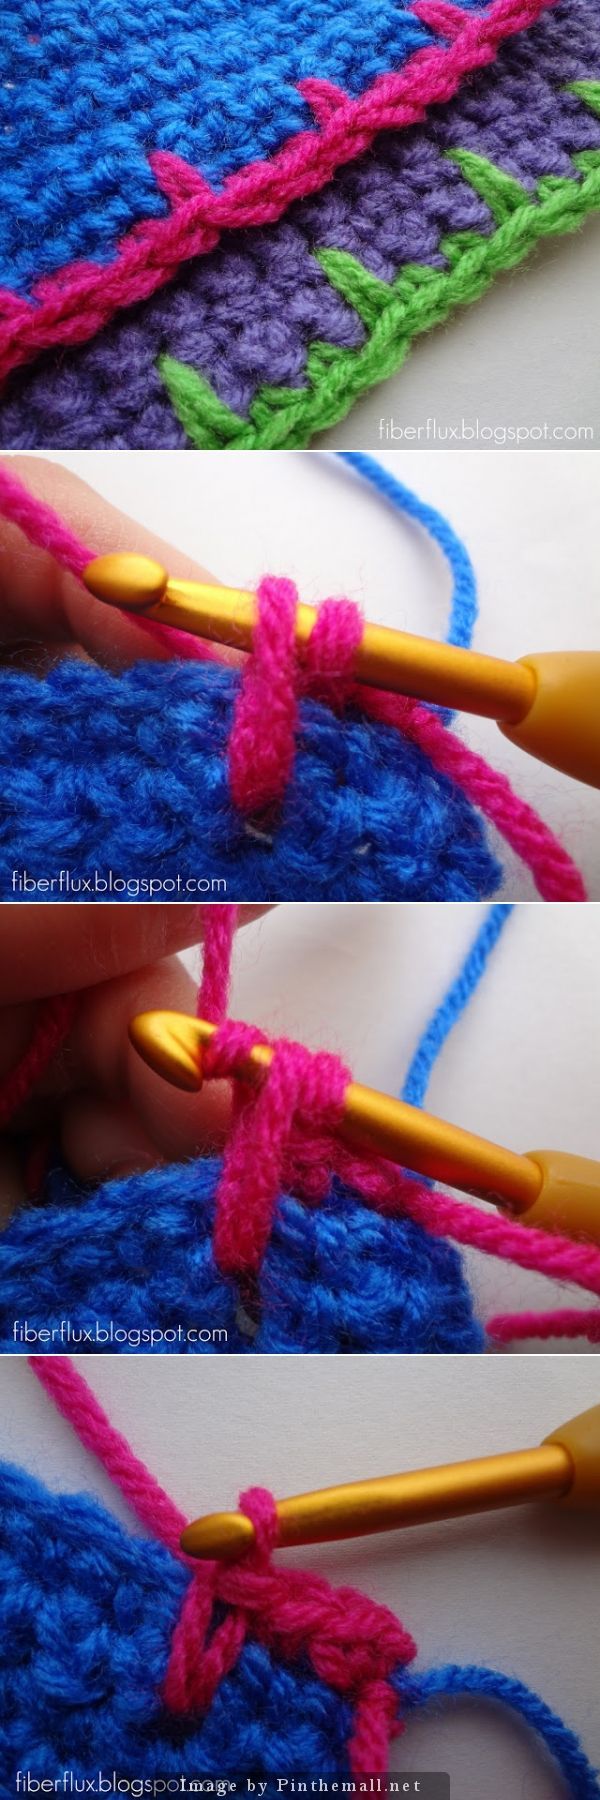 #Crochet_Tutorial – “How to crochet a Blanket Stitch edging. Many more photos at fiberflux. Simple, but effective edging.” Enjoy from